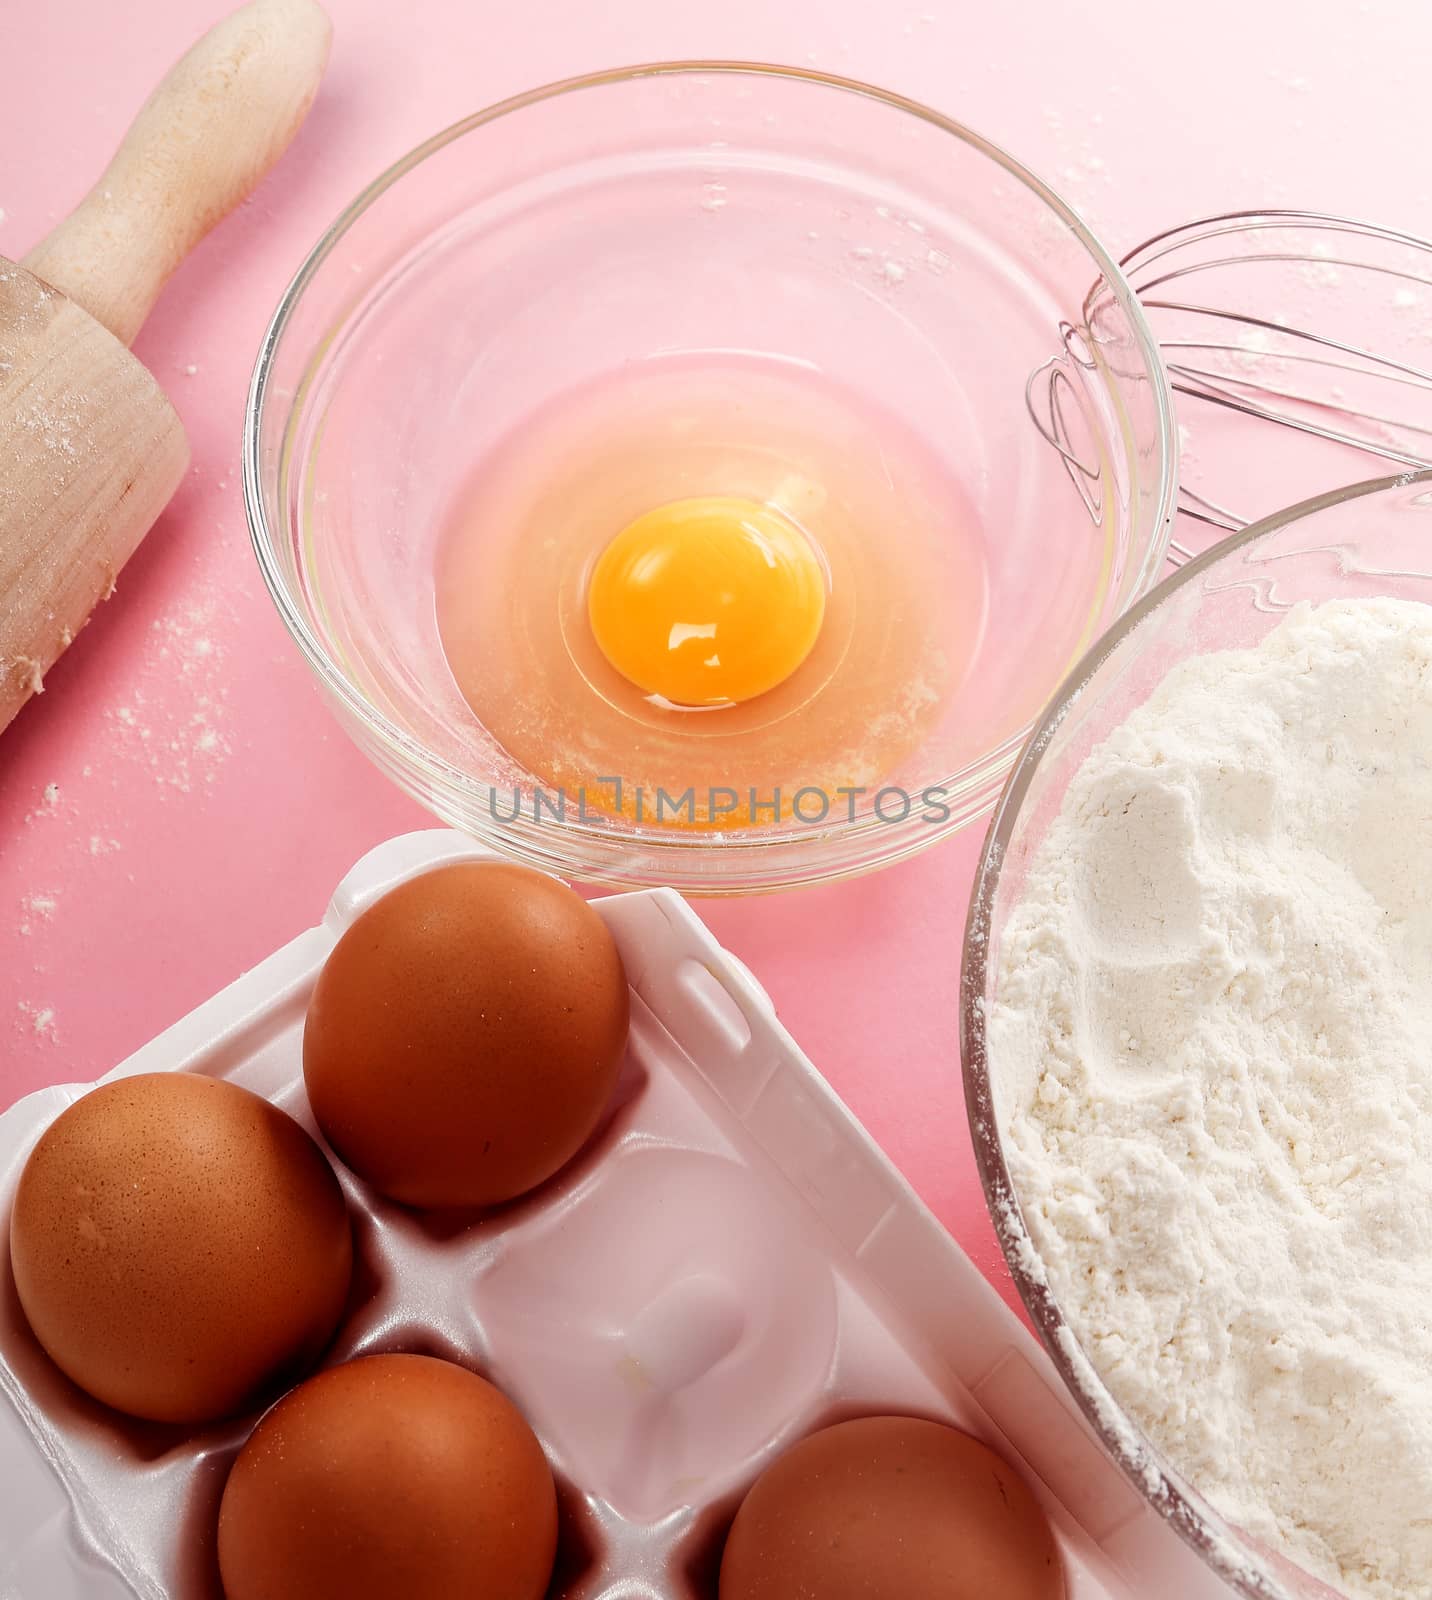 Kitchen, cuisine. Dough and eggs on the table